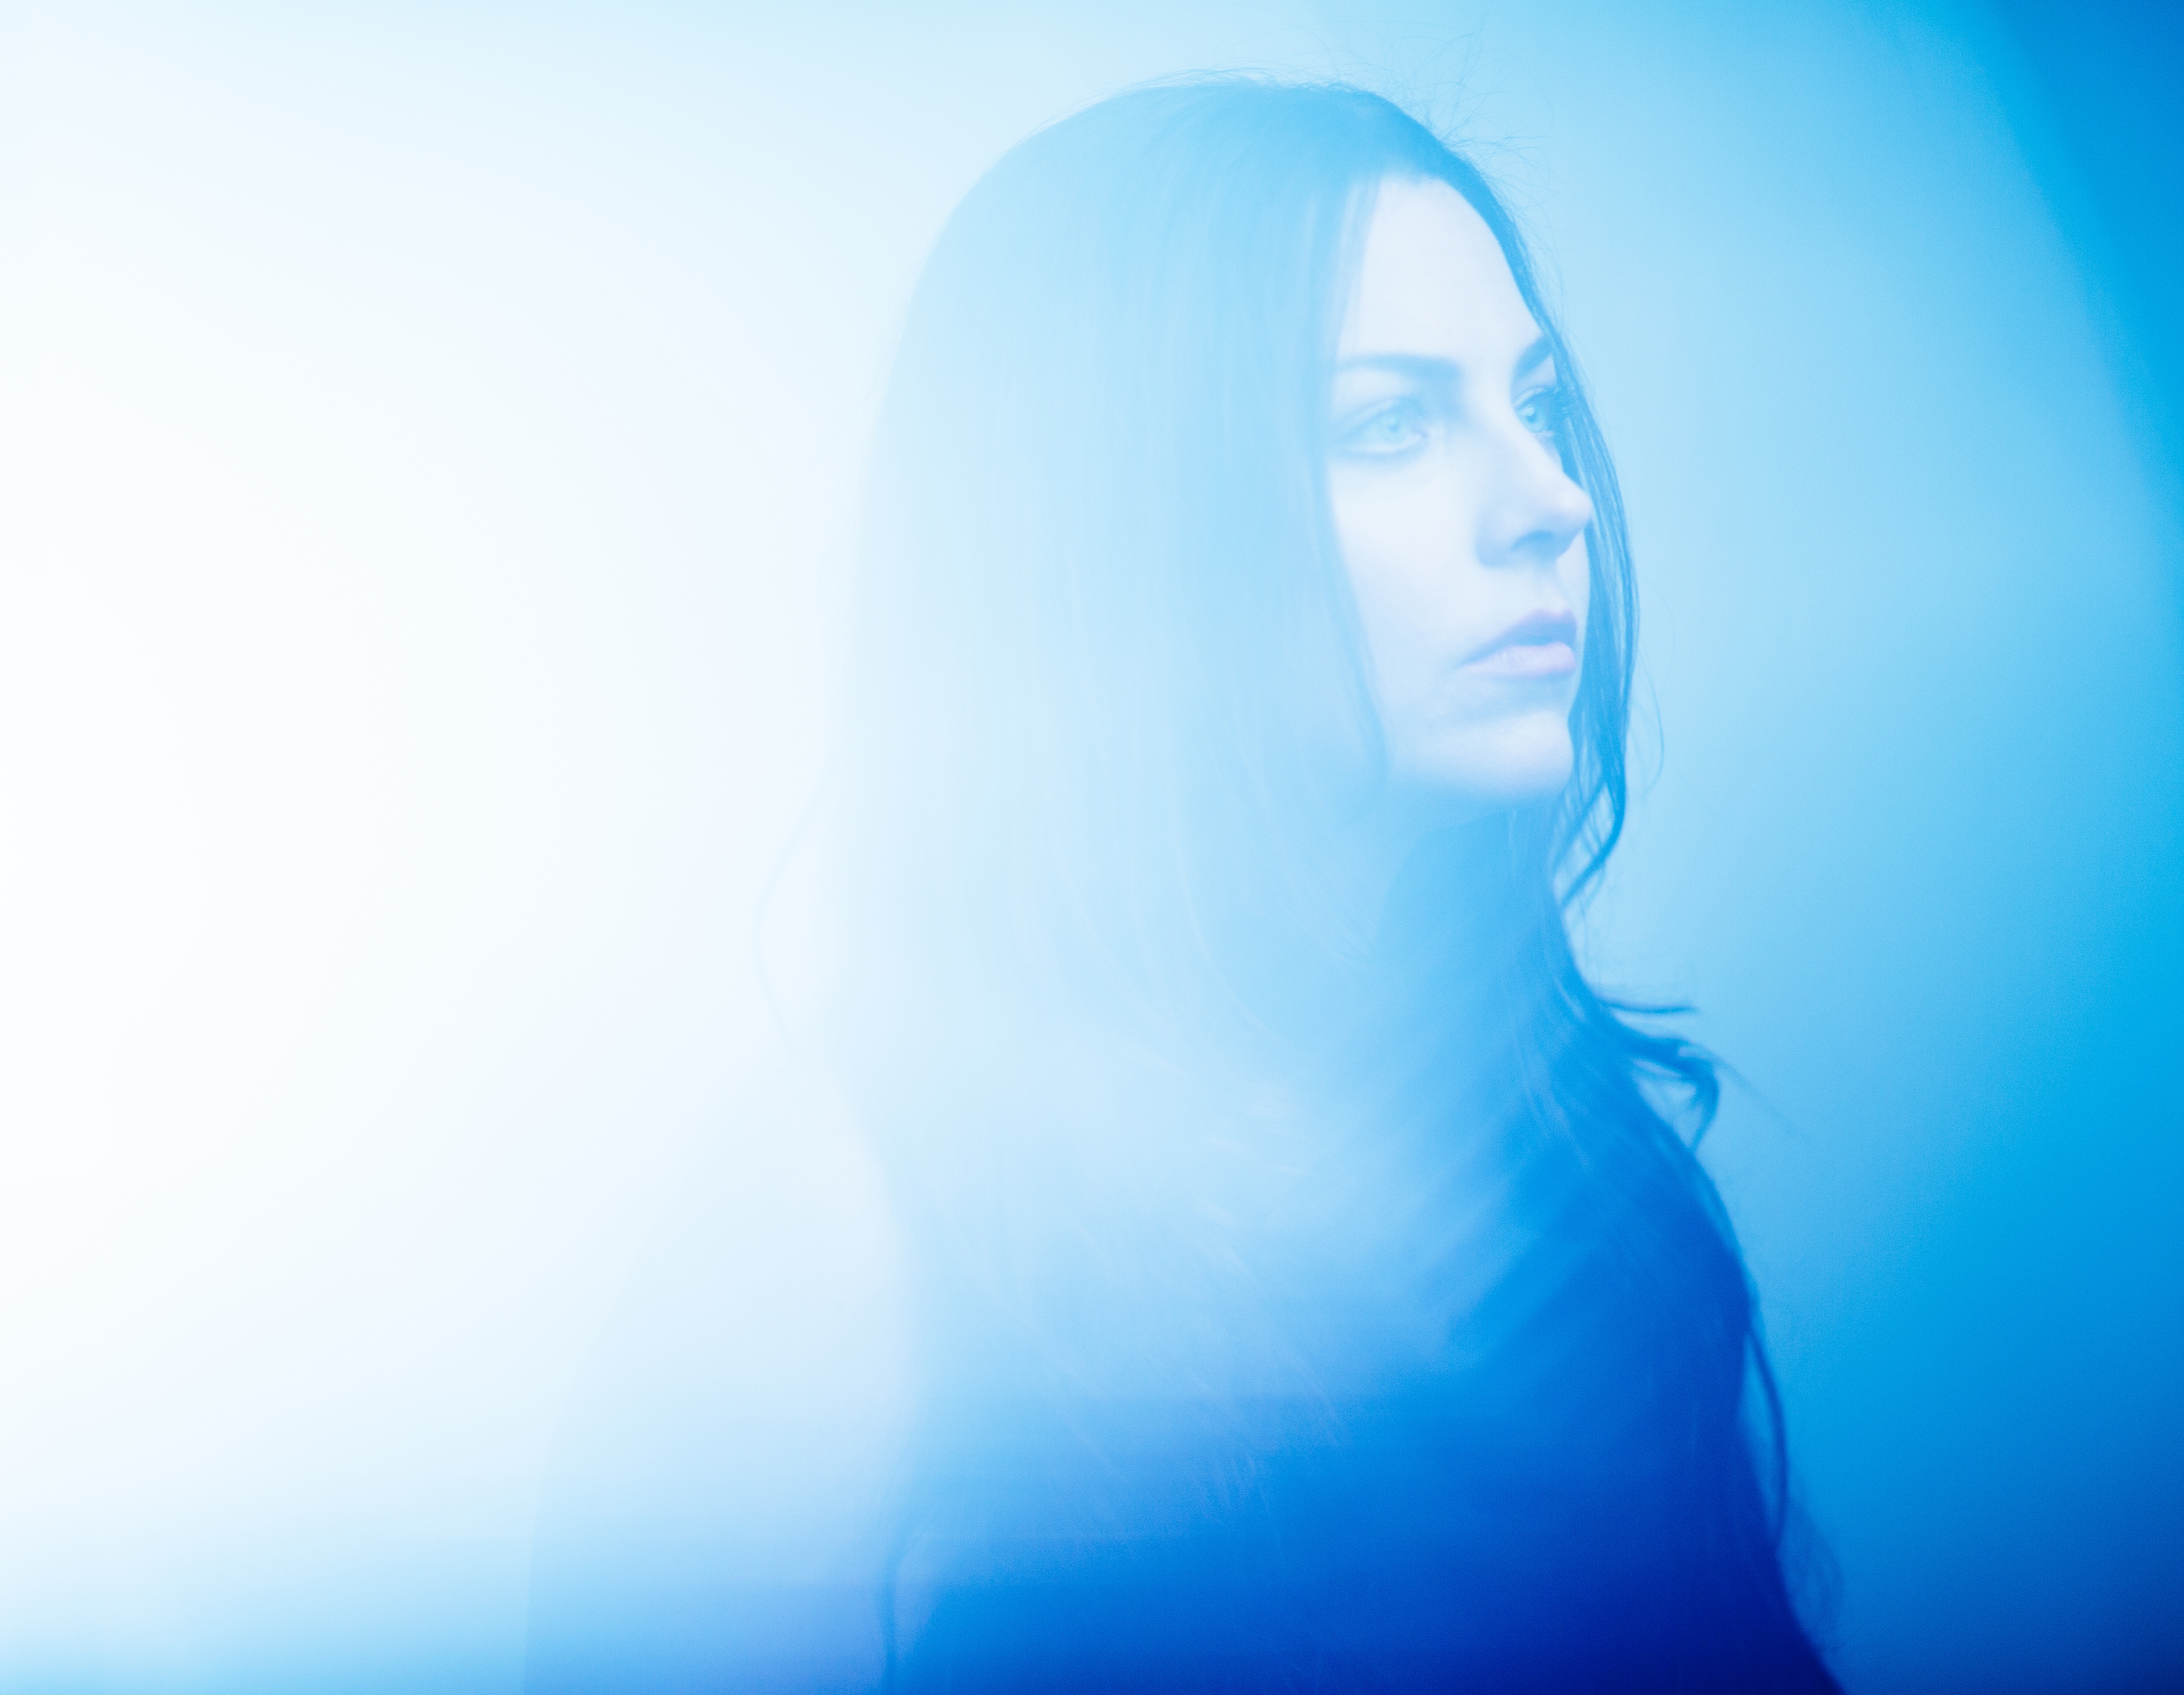 4948x3840
Keywords: amy lee;recover;photoshoot;covers;2016;blue